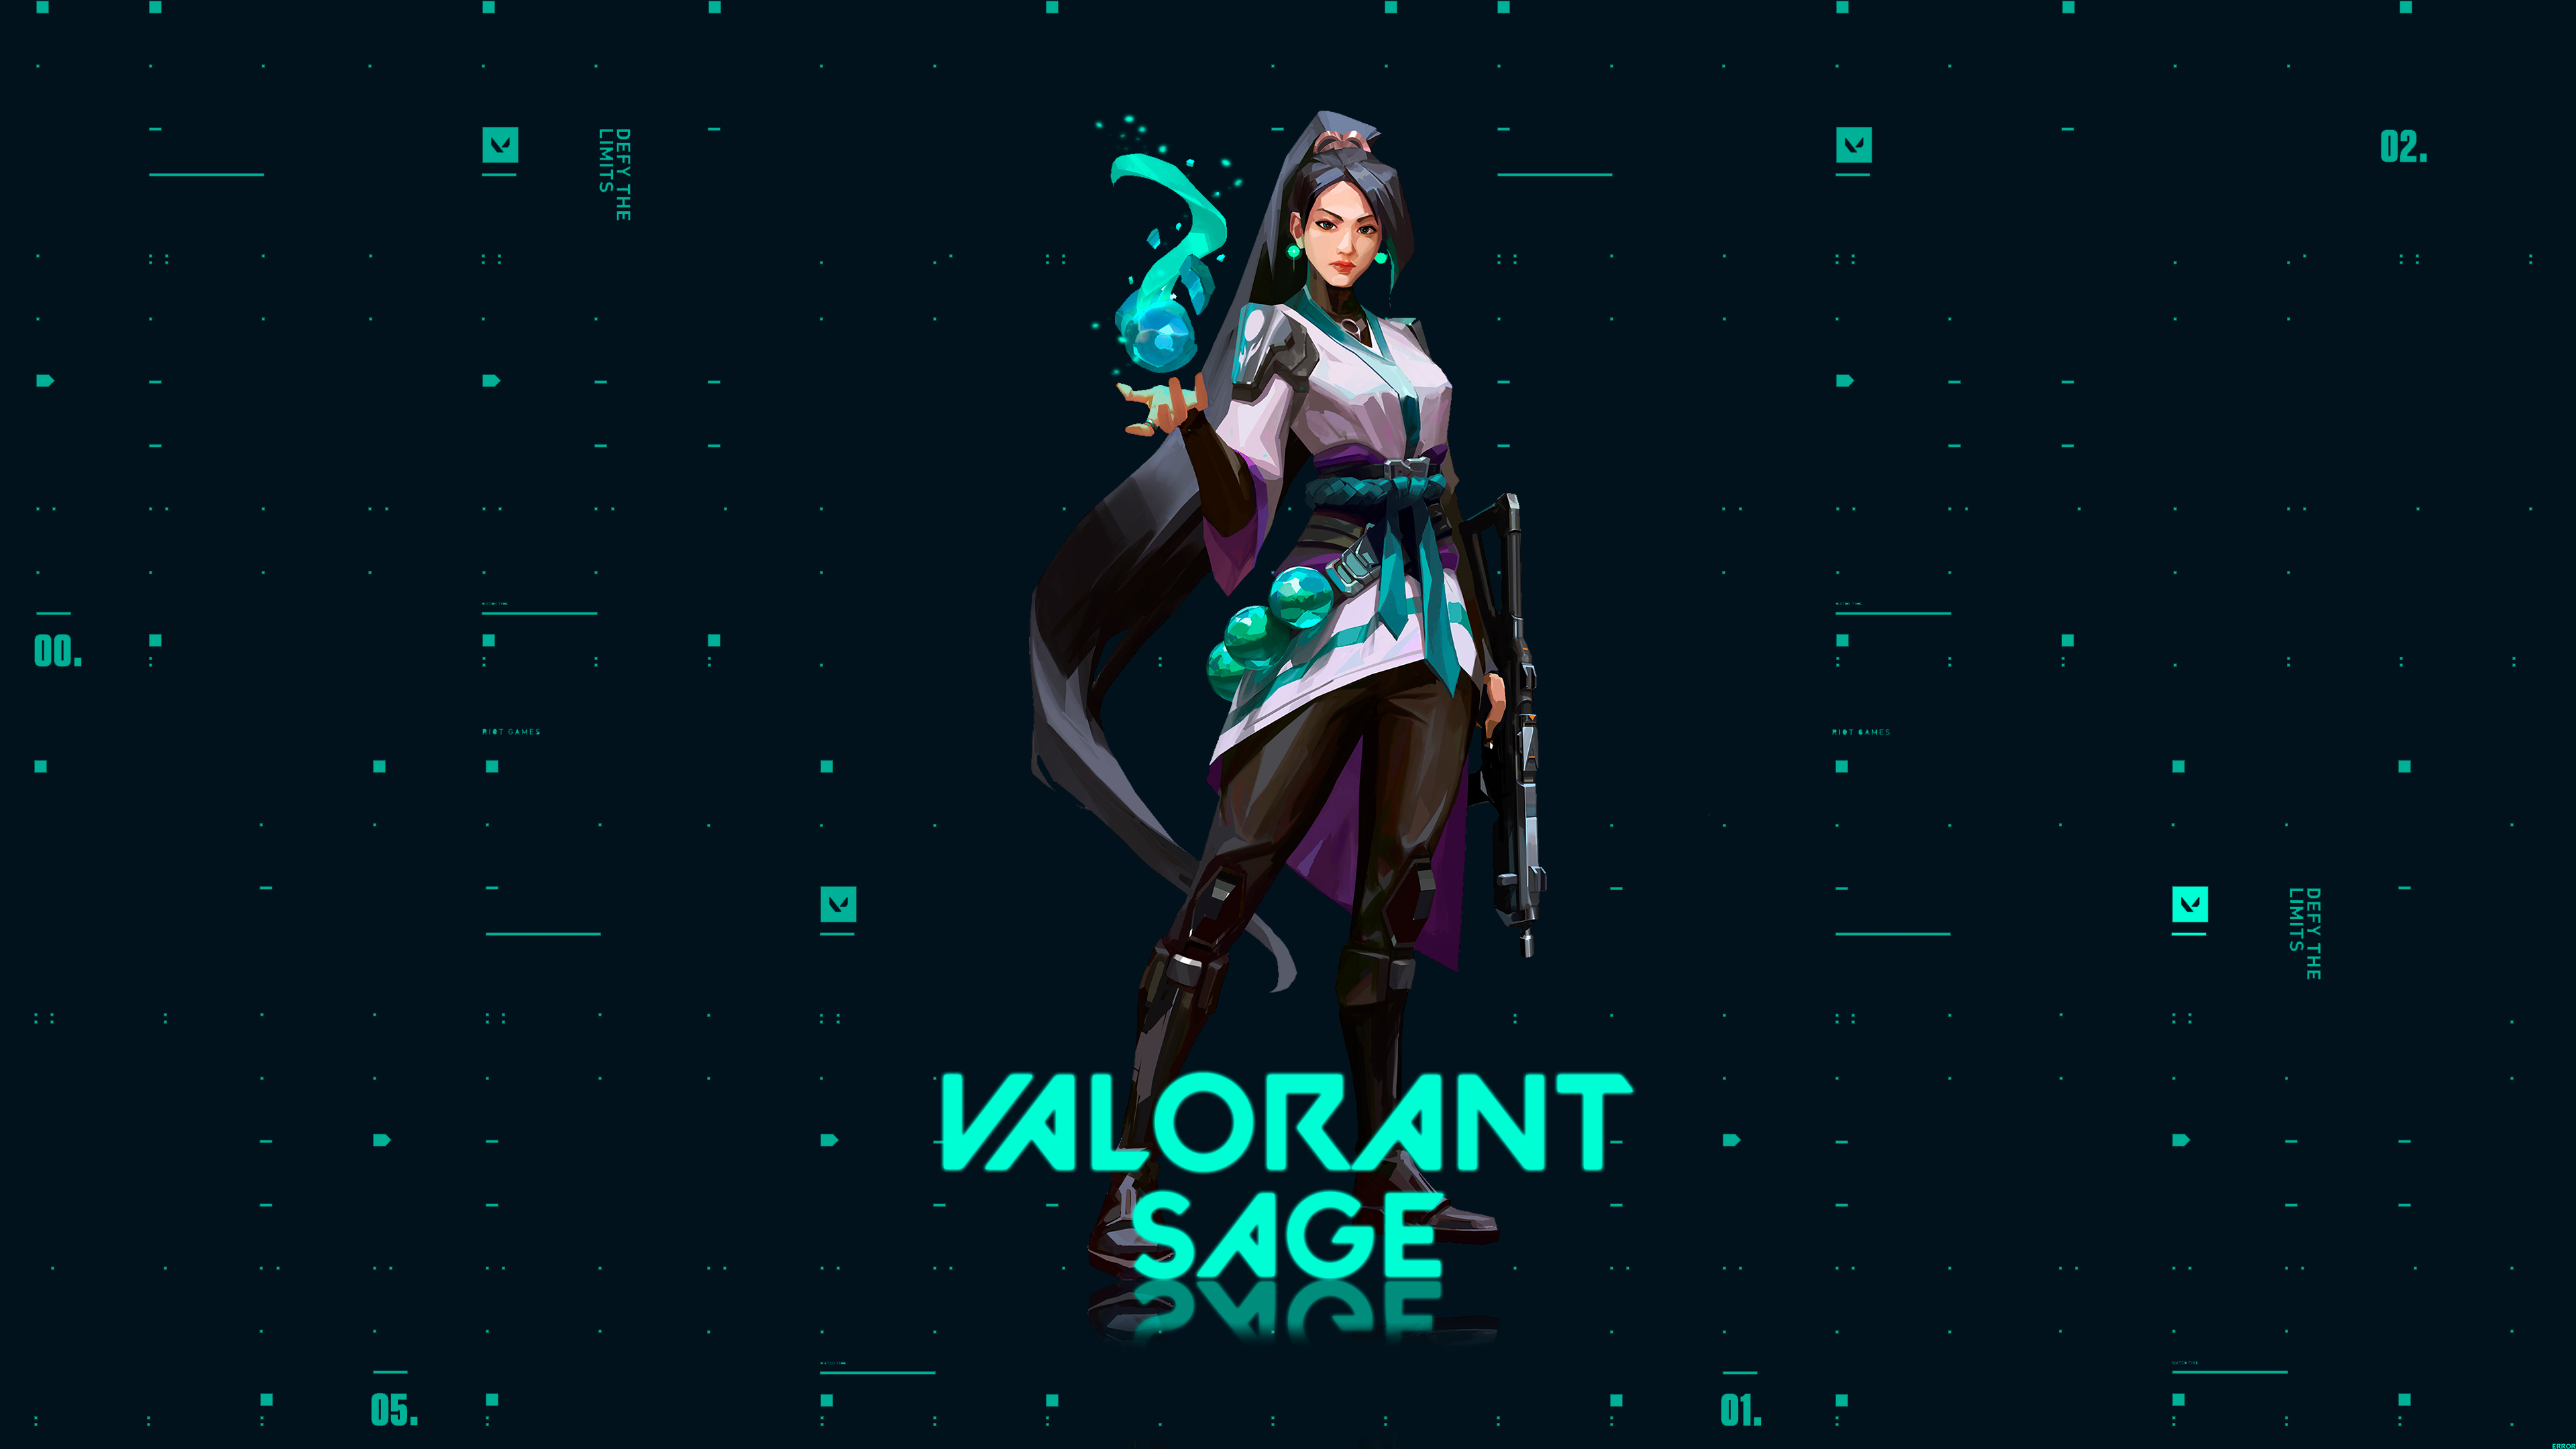 Sage valorant 1080P 2k 4k HD wallpapers backgrounds free download   Rare Gallery